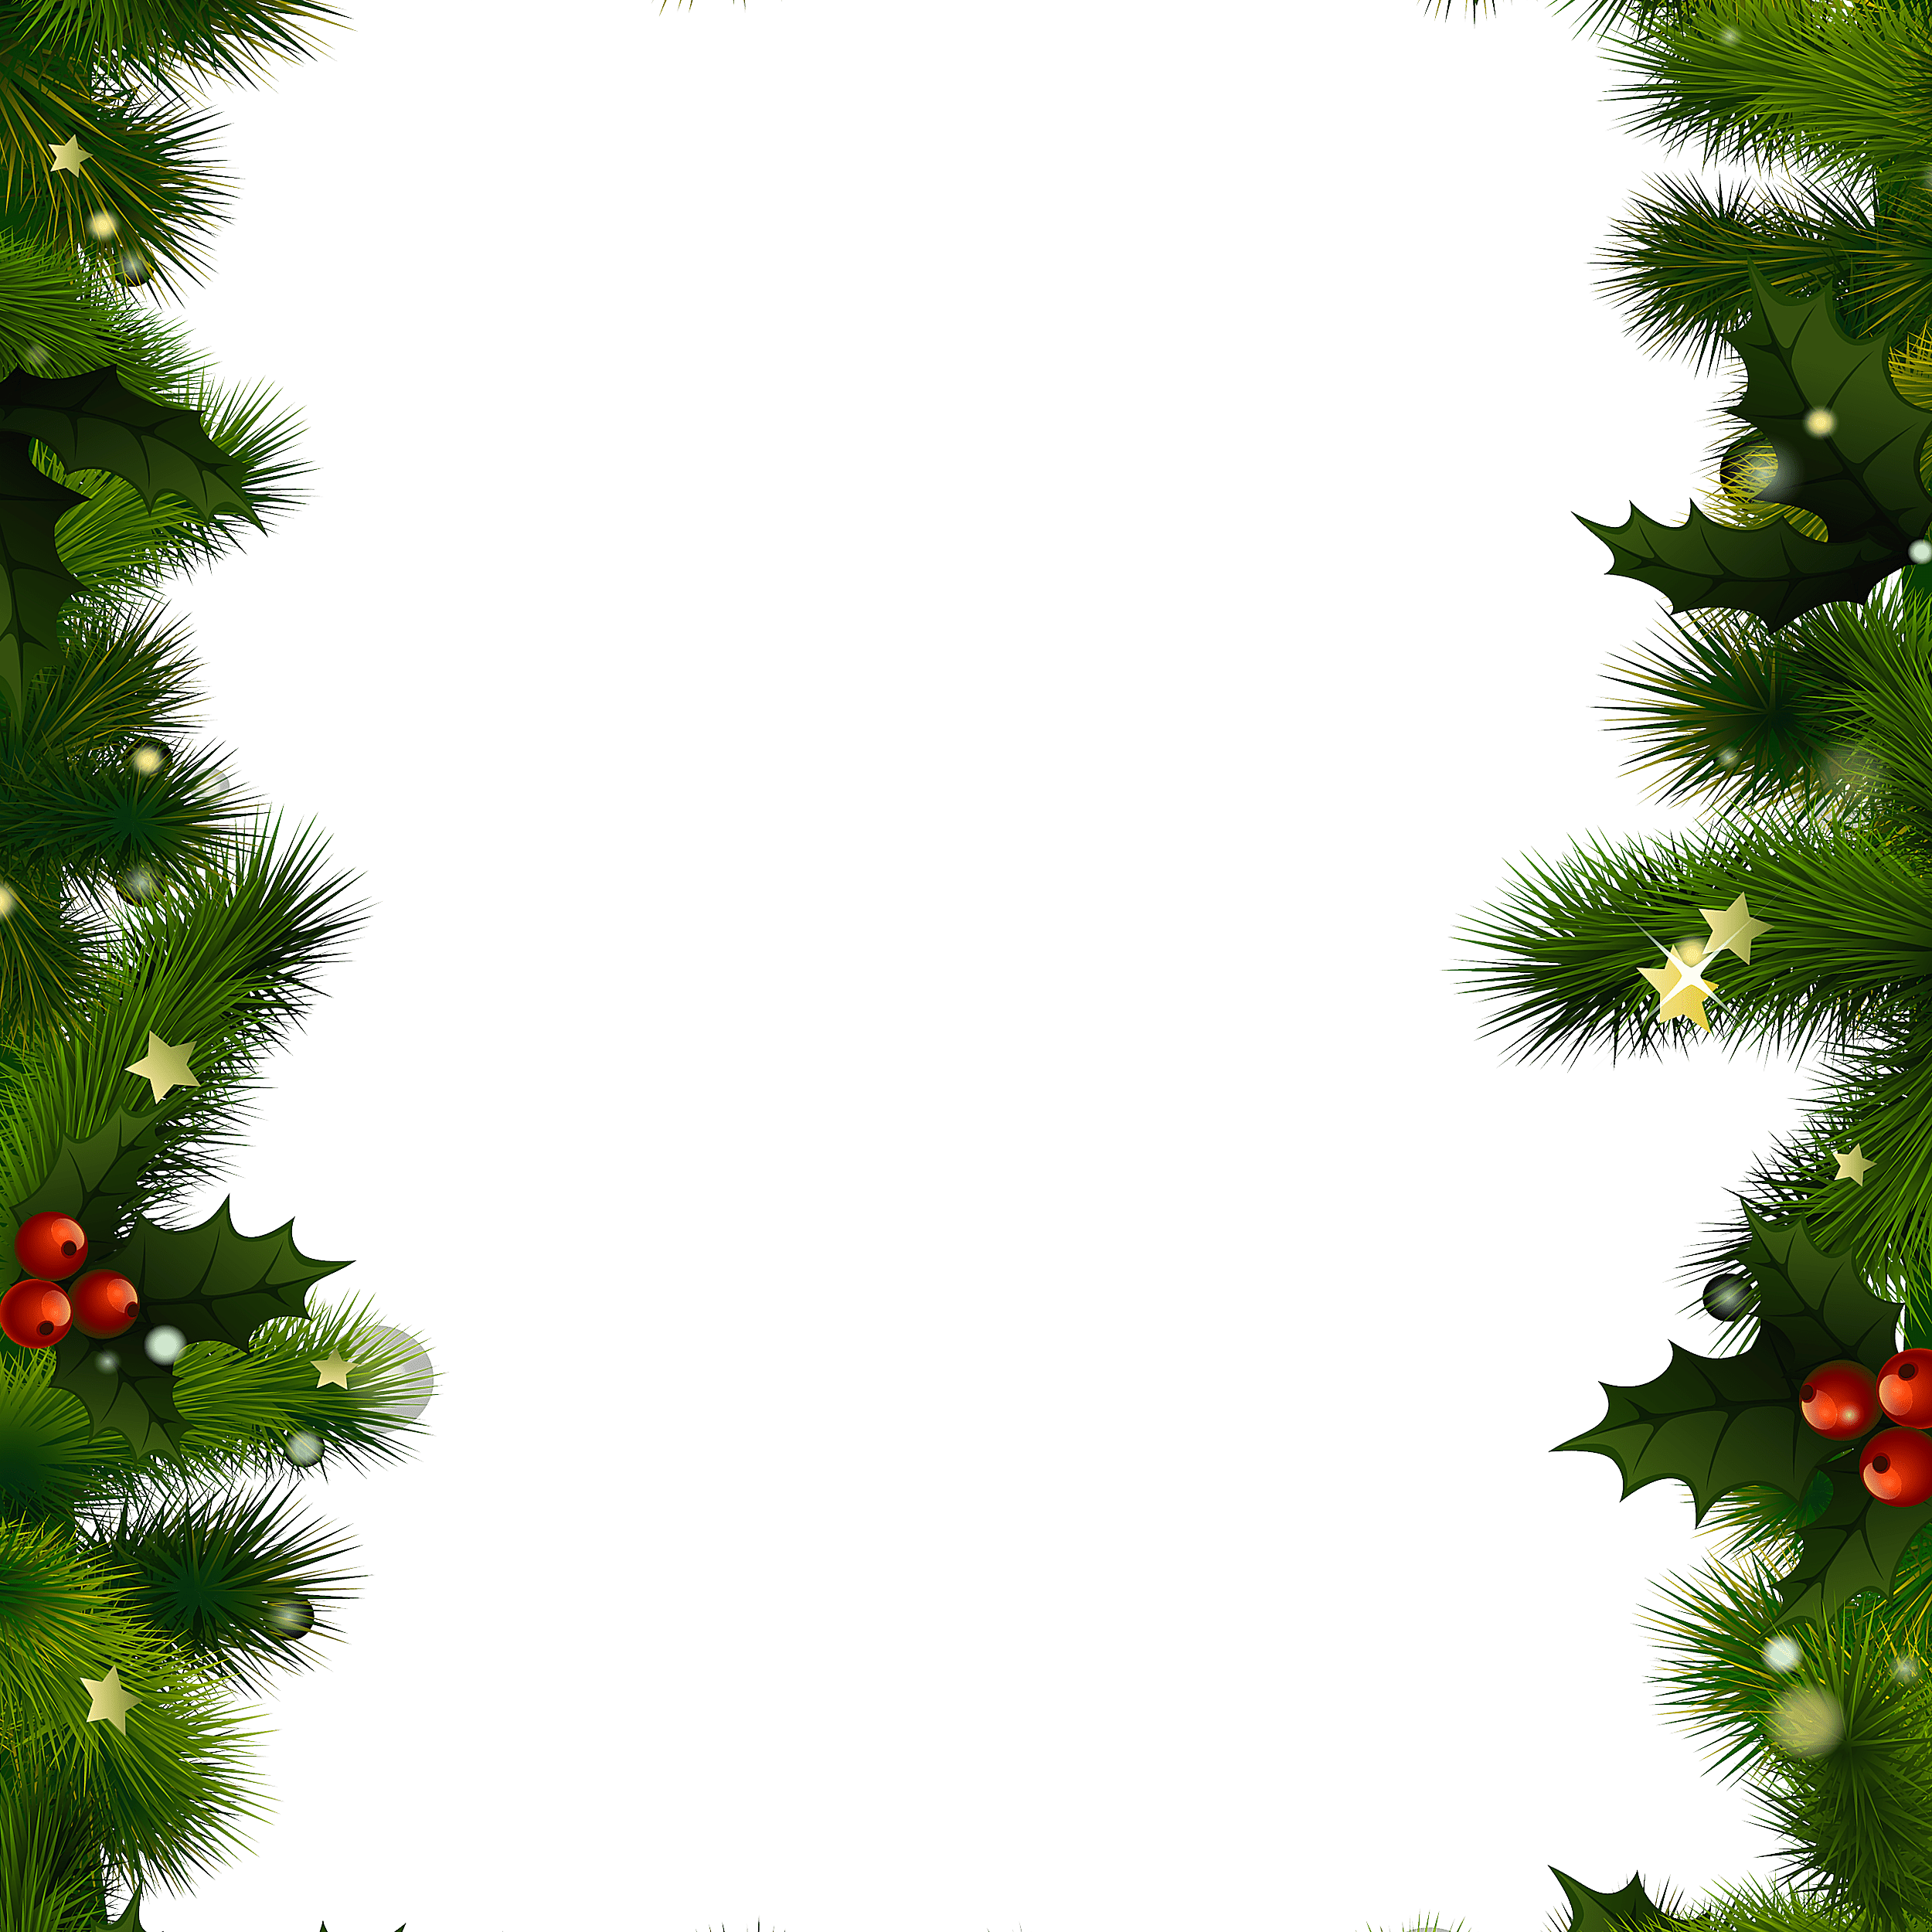 The Best Free Christmas Borders and Frames.